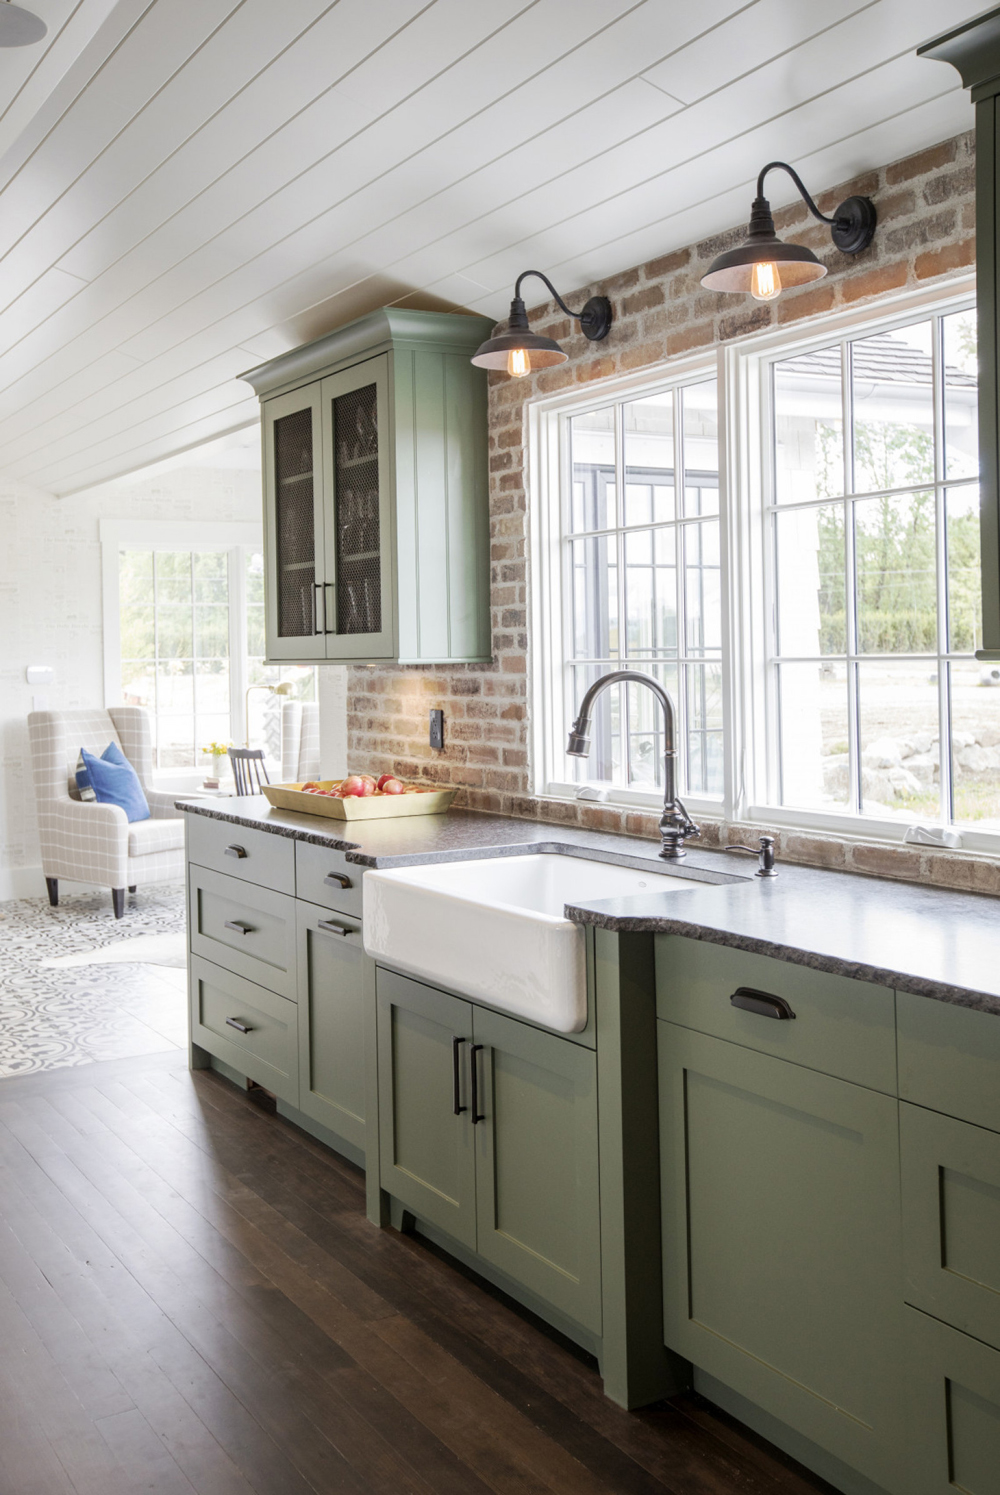 A renovated kitchen with wood flooring and avocado green cabinetry